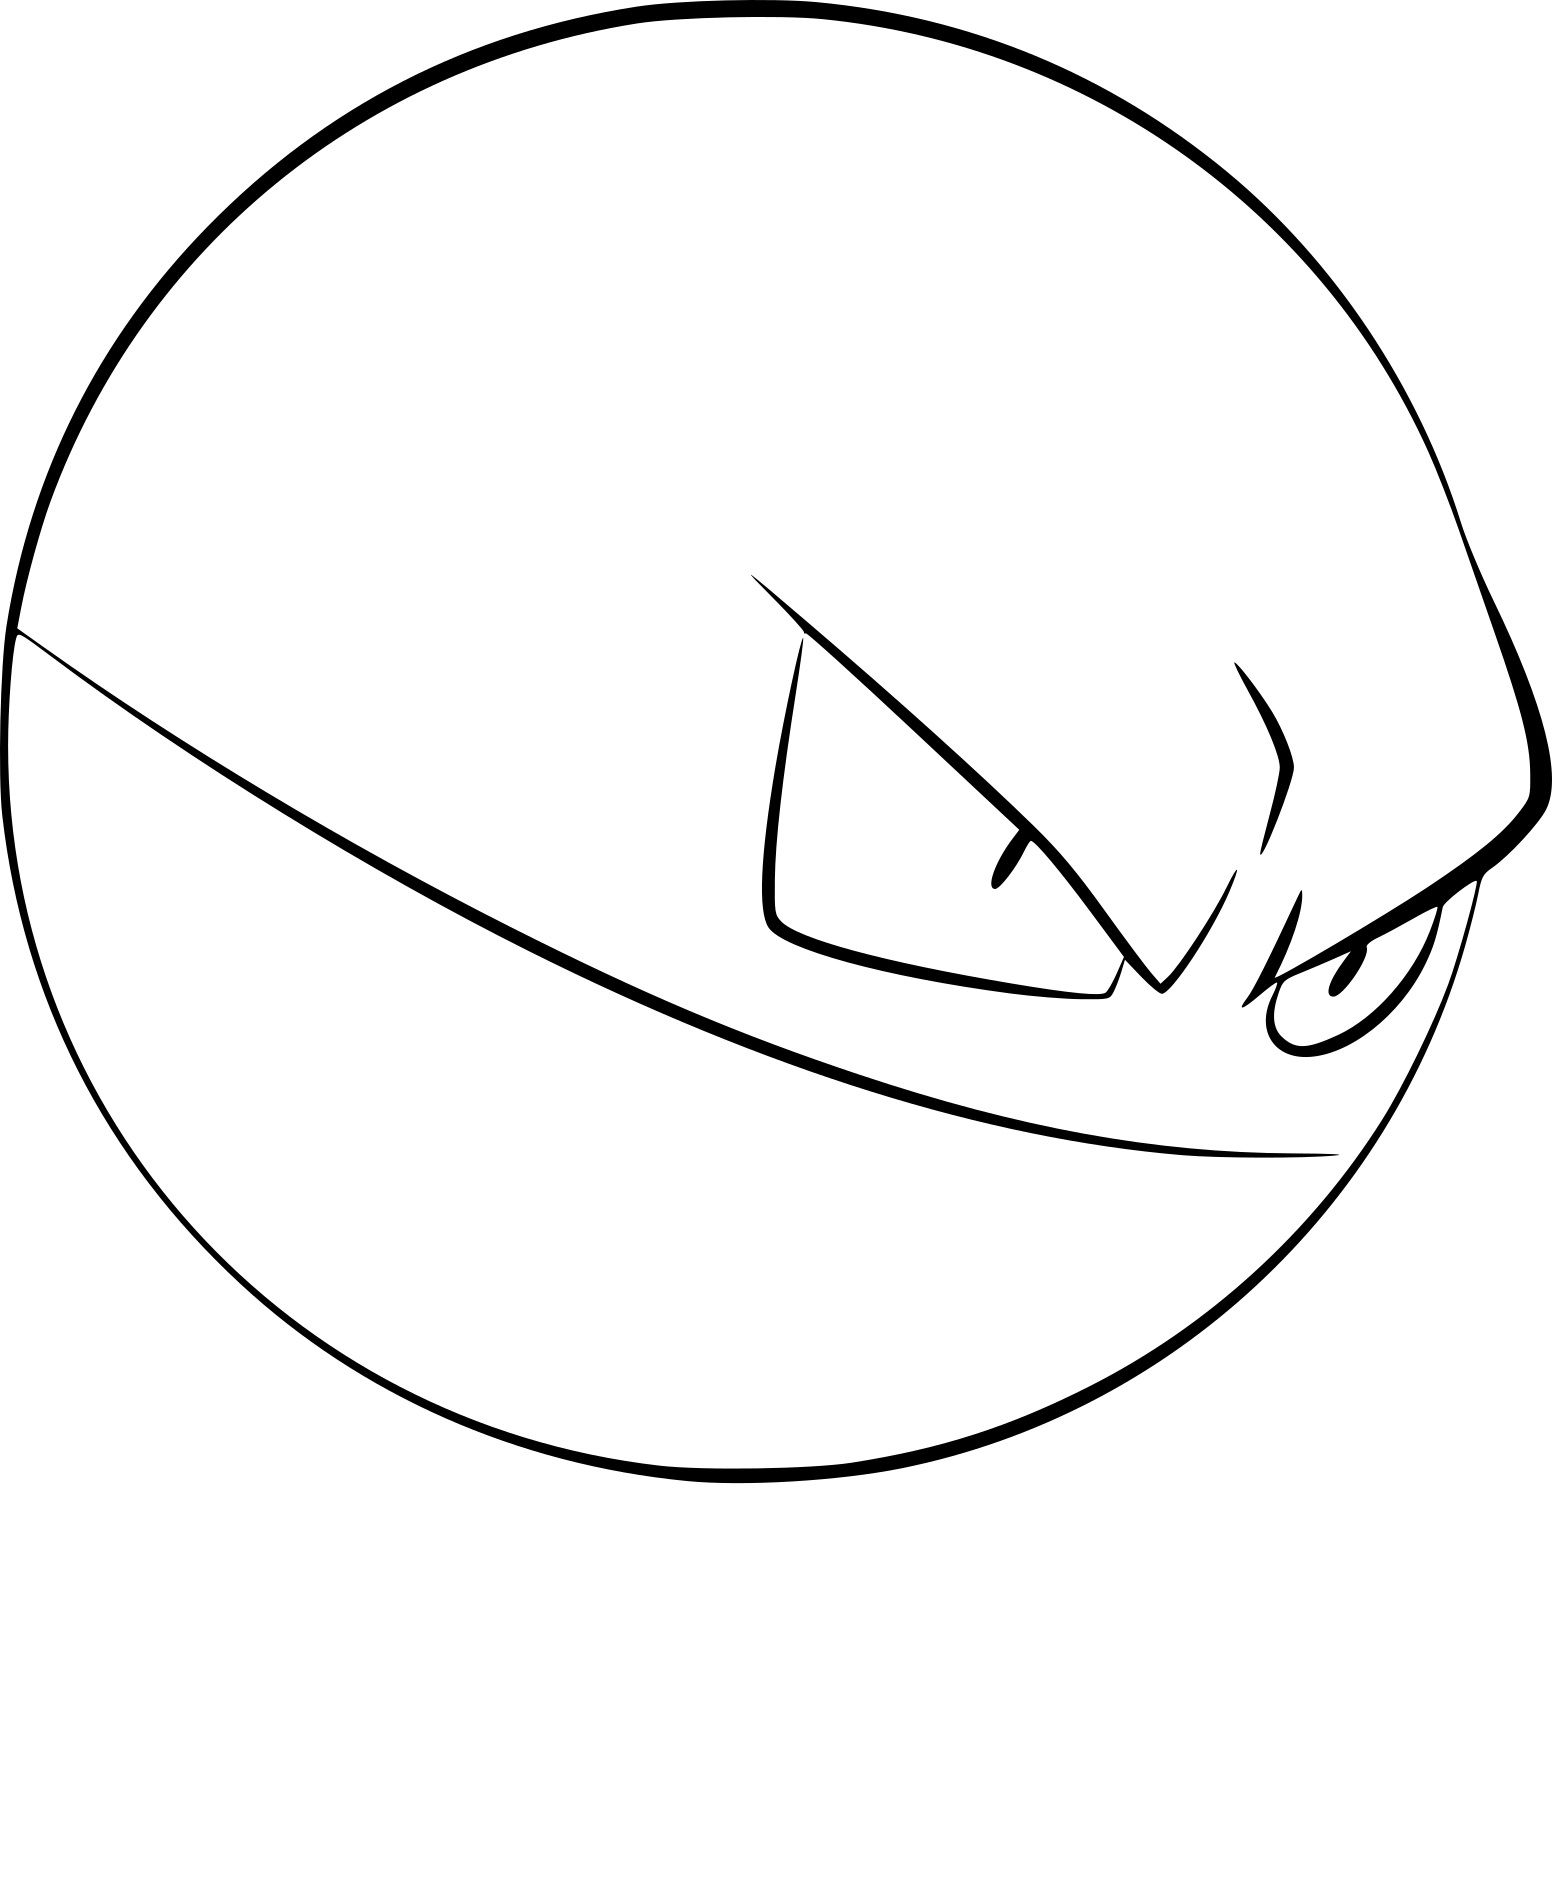 Voltorb Pokemon coloring page